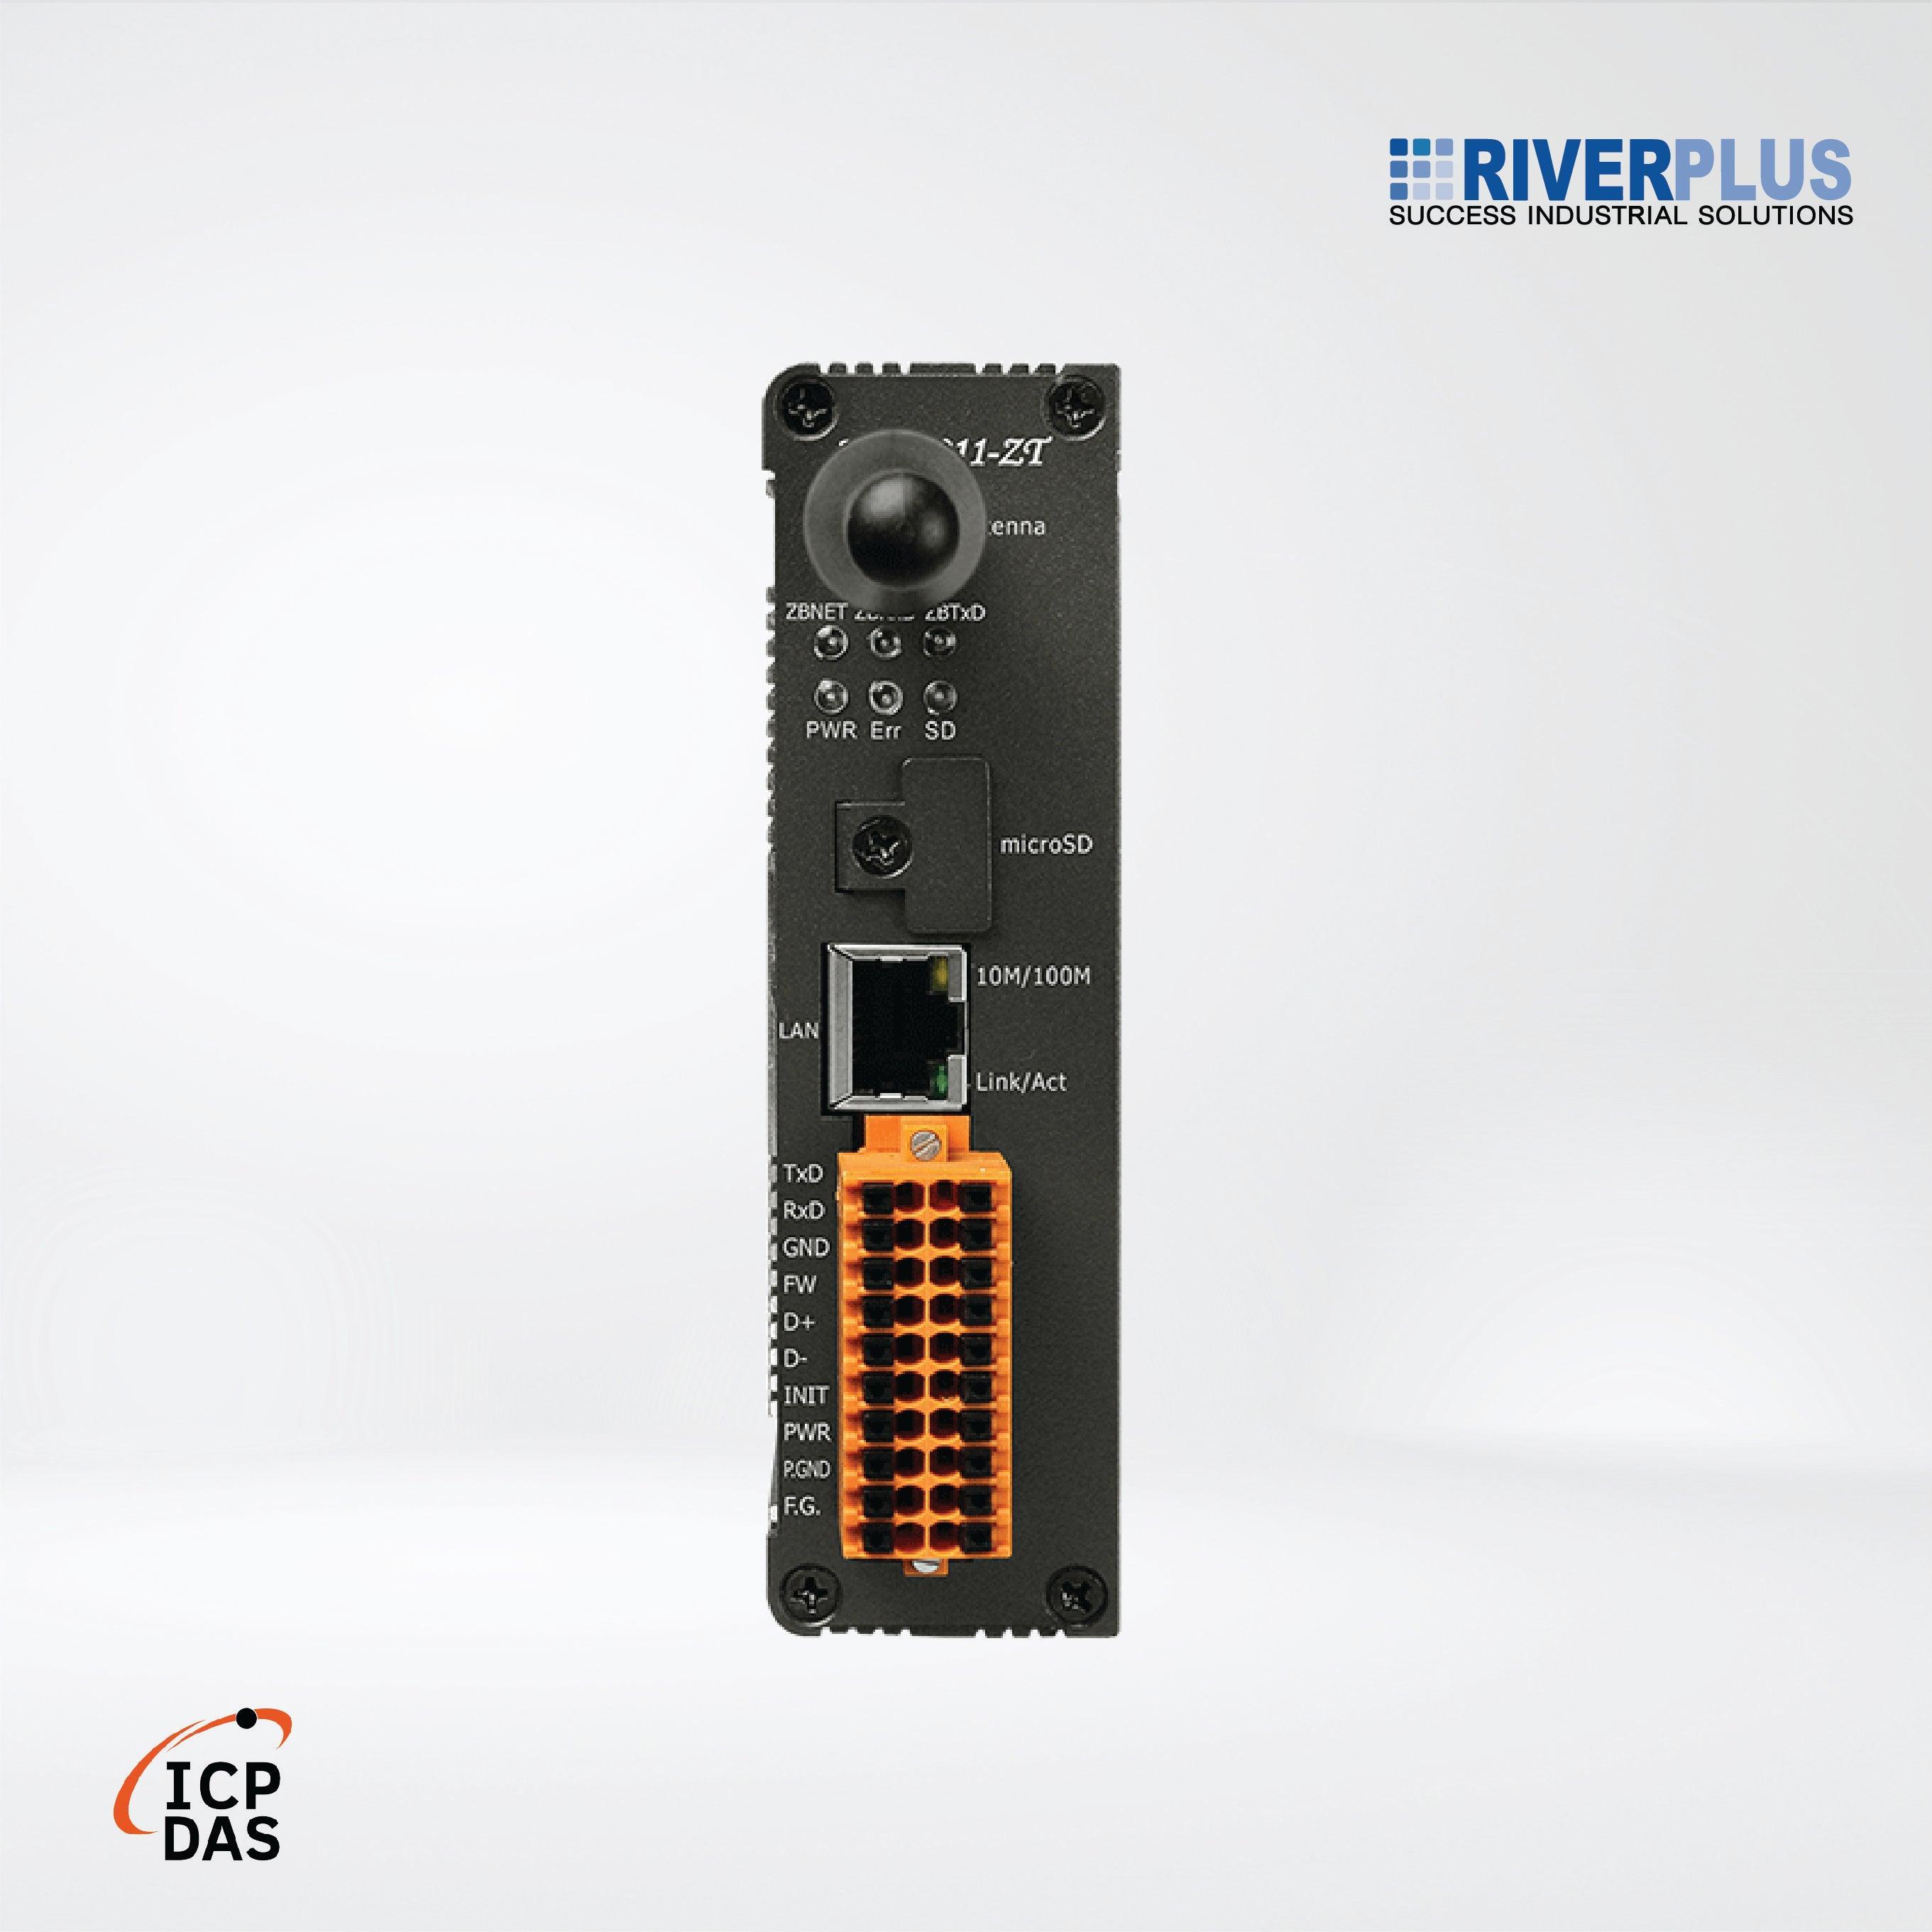 MDC-211-ZT ZigBee Modbus data concentrator 1x Ethernet, 1x RS-232 and 1x RS-485 - Riverplus